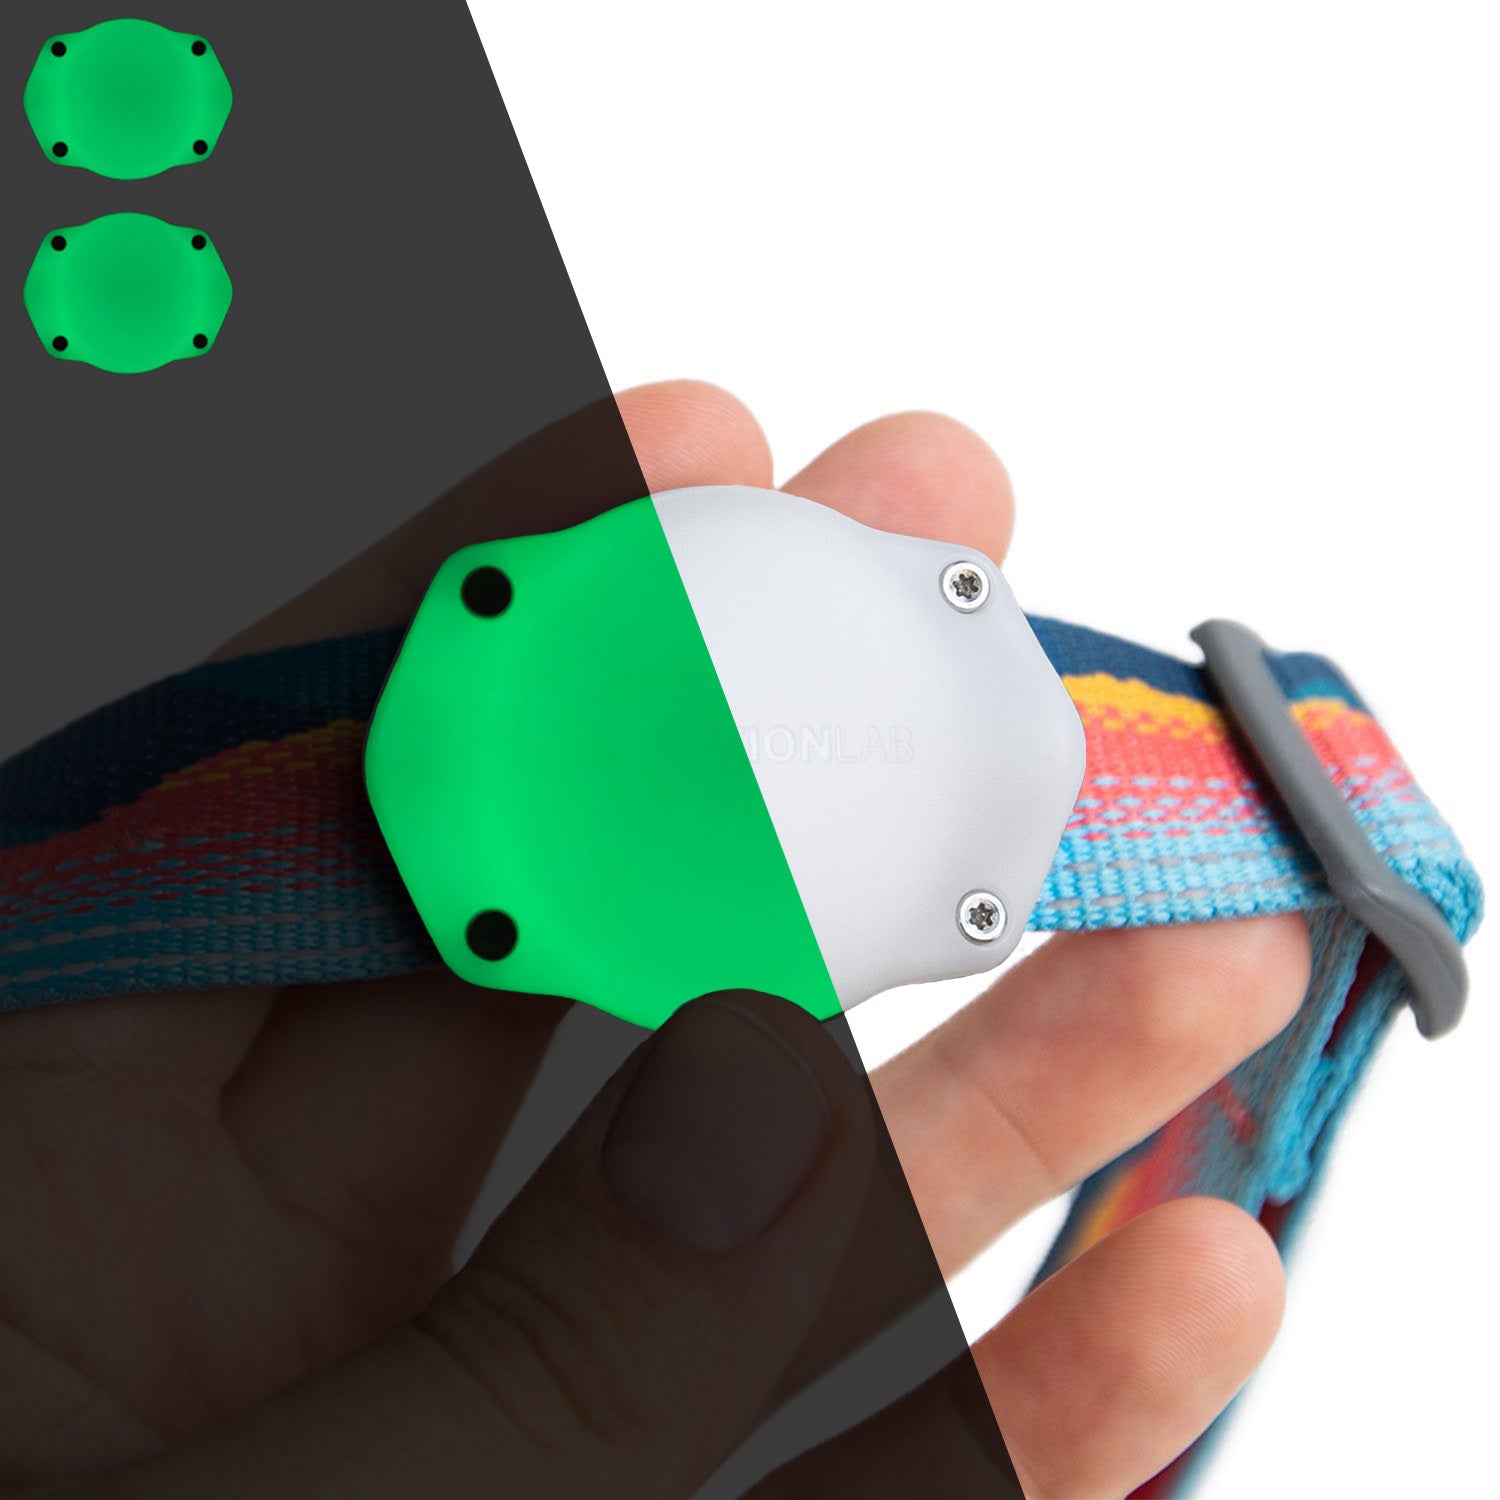  Elevation Lab TagVault Pet - The Most Secure AirTag